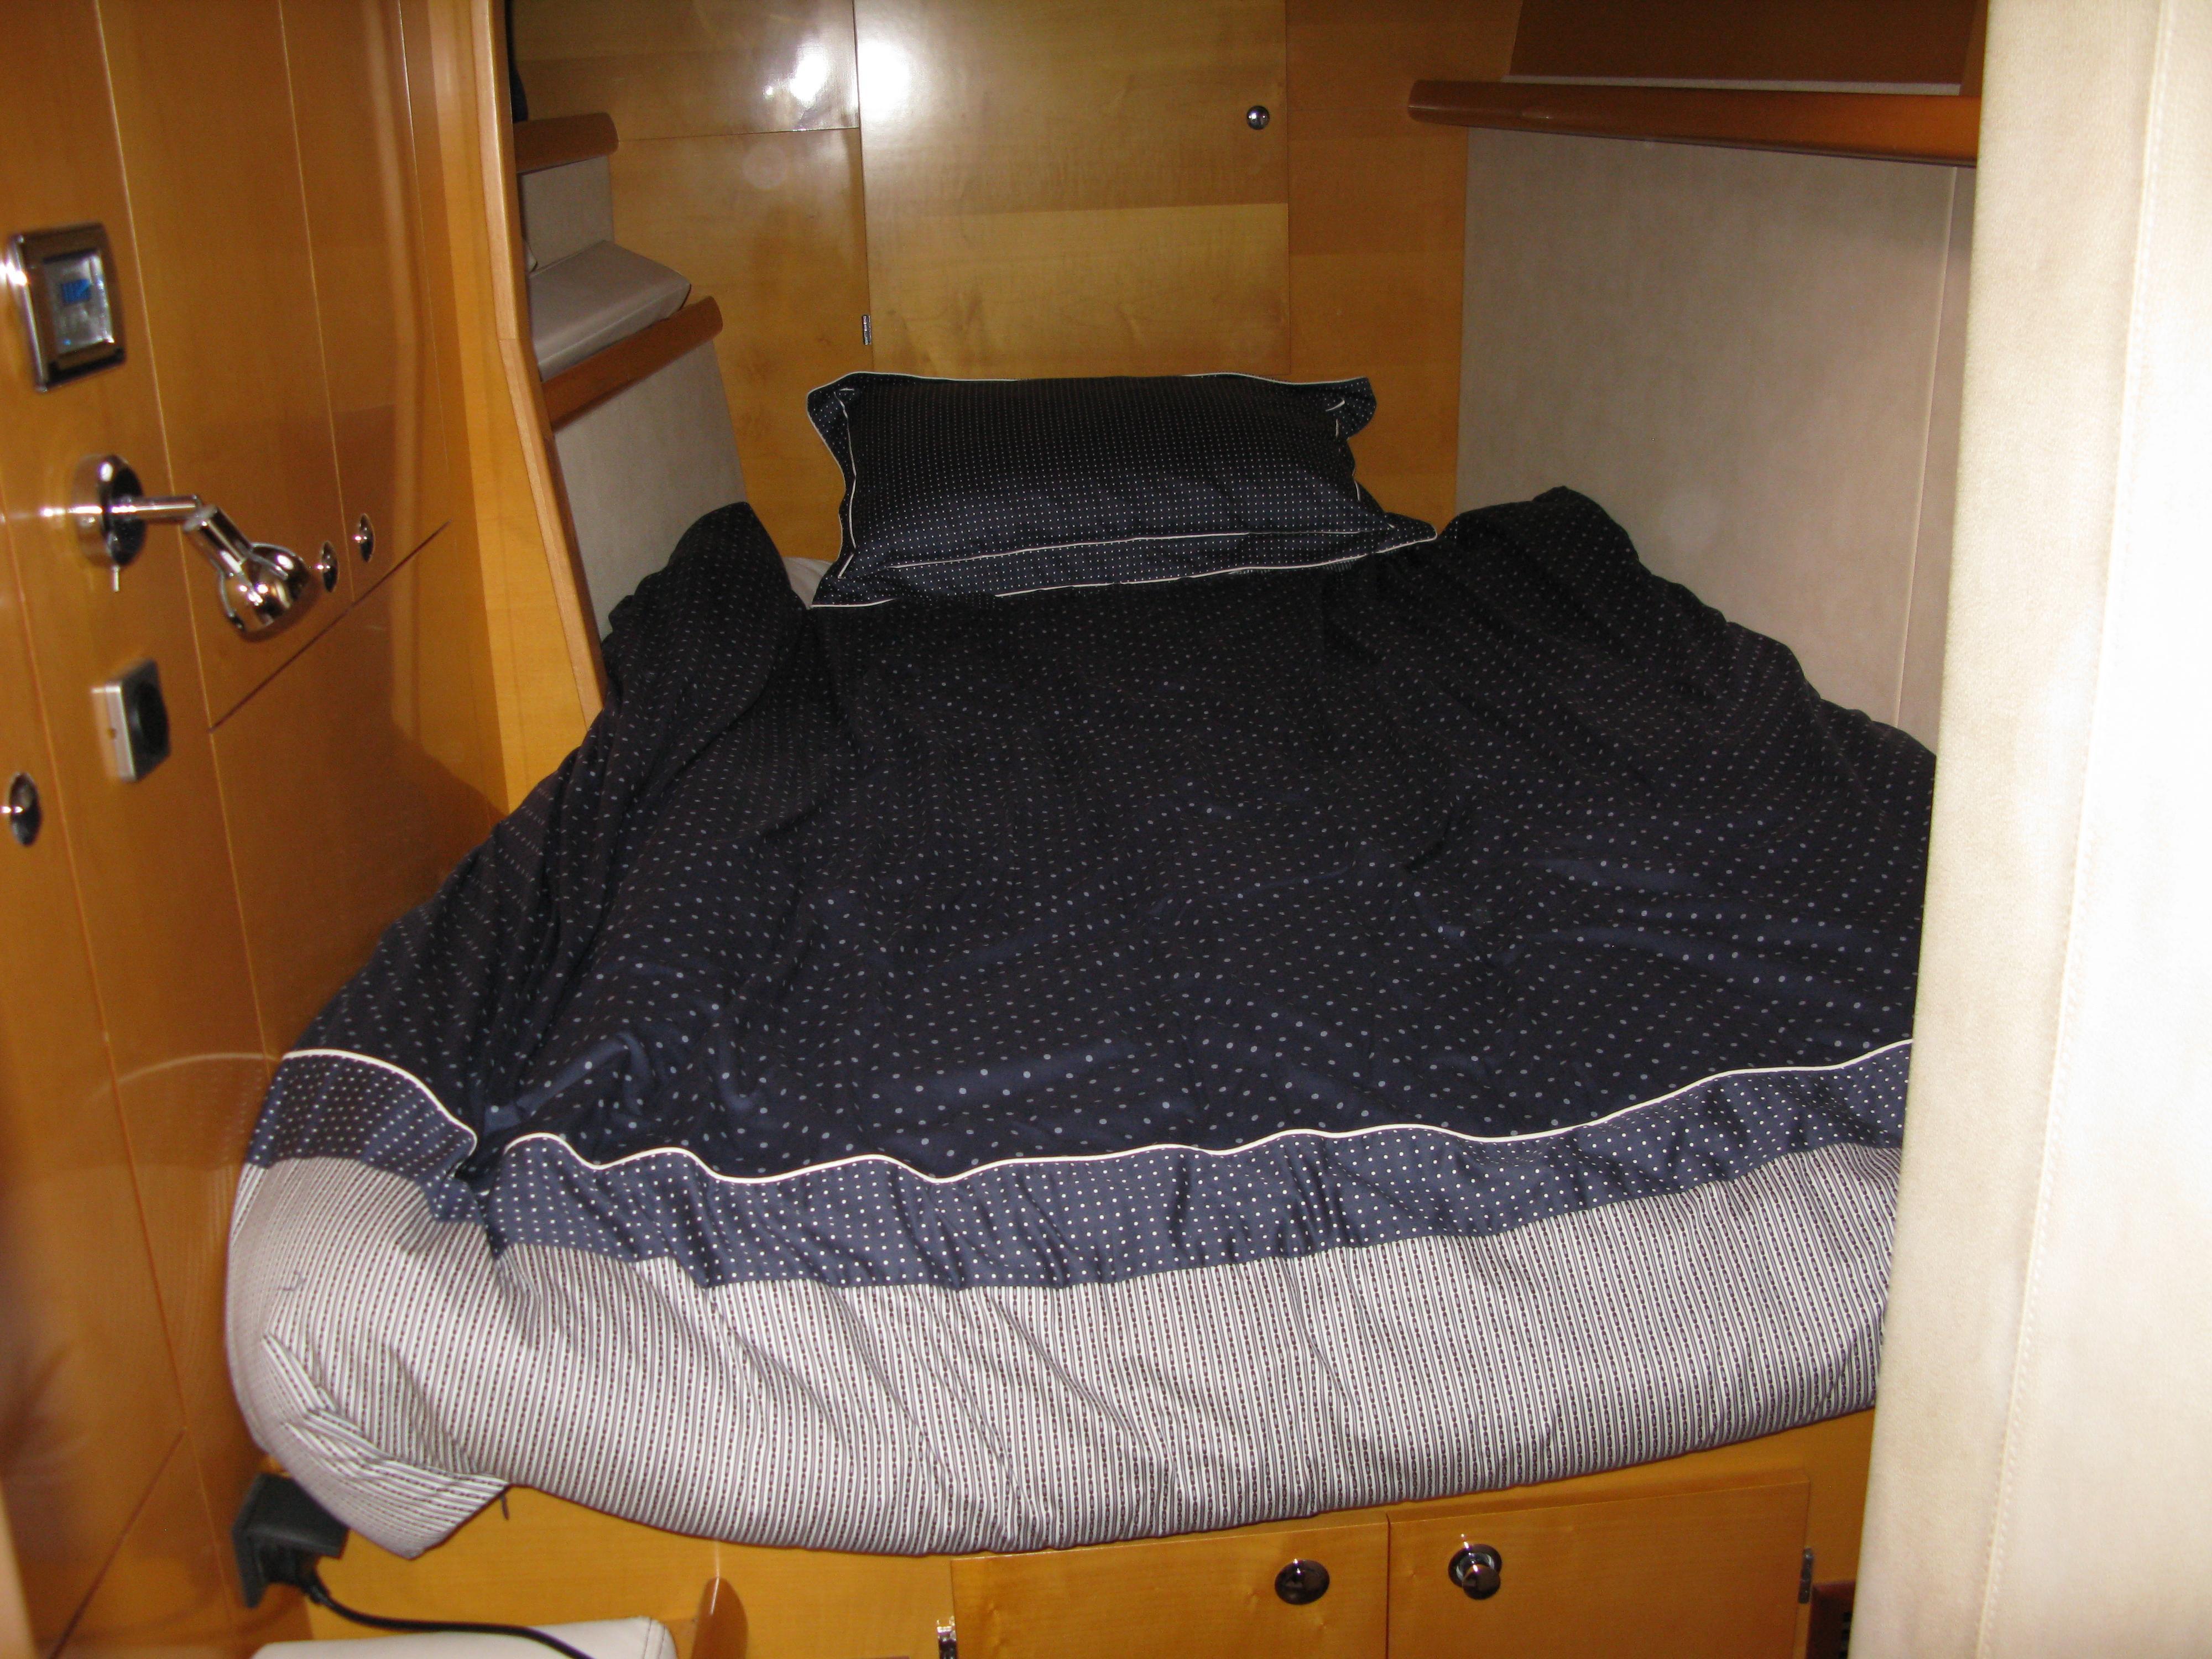 Fountaine Pajot Cumberland 44, Guernsey